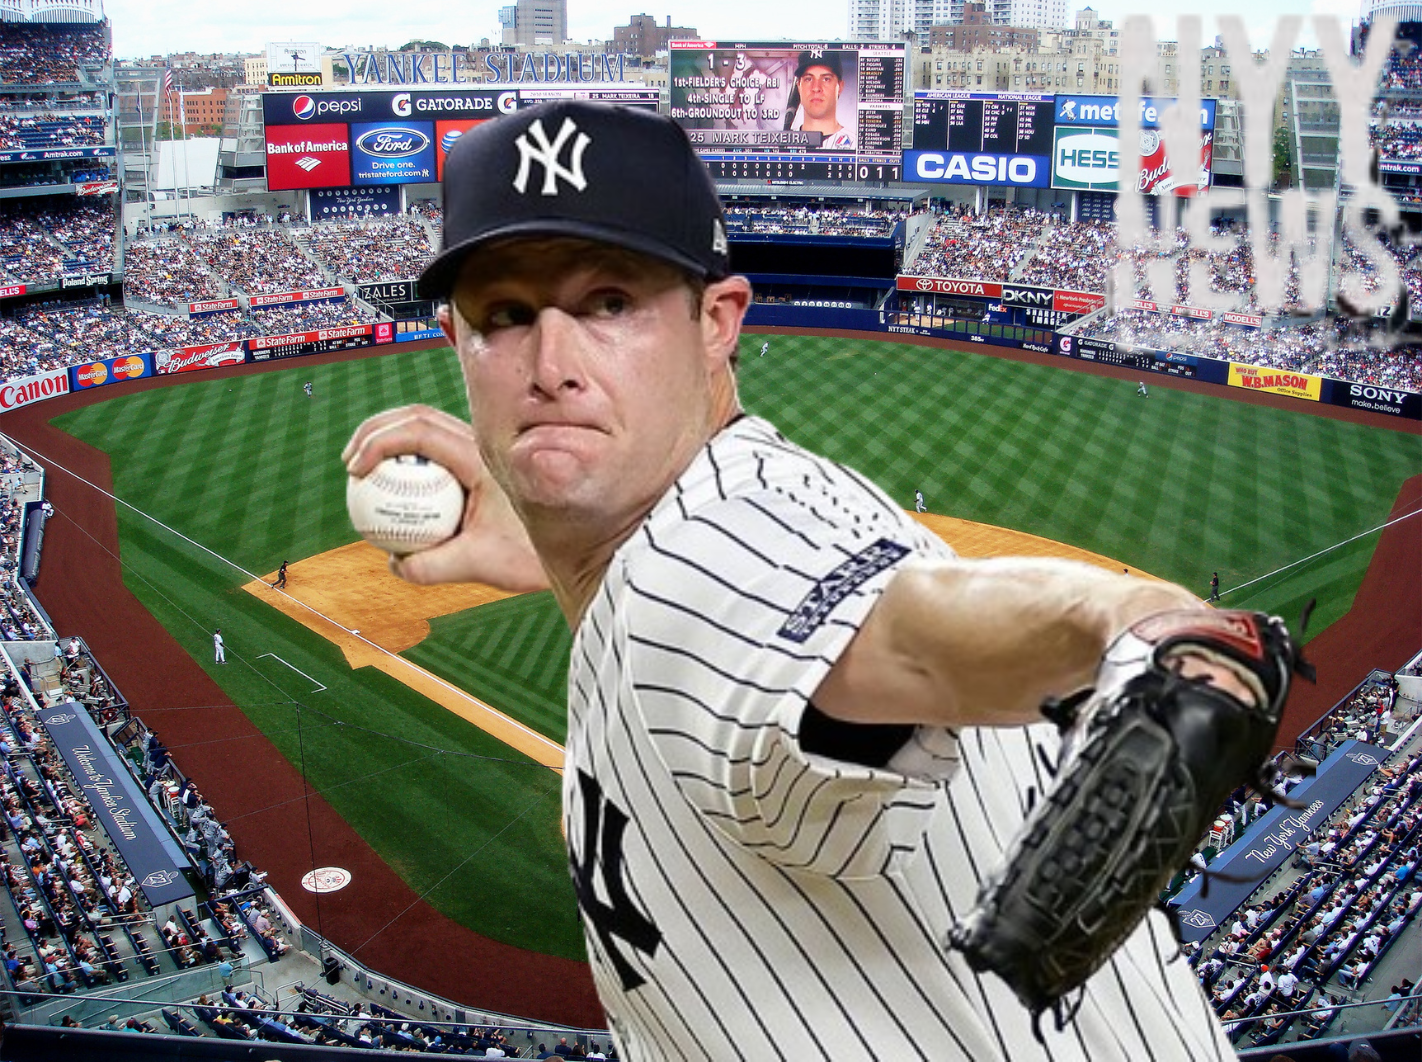 The “ACE” of The Yankees With Pain in His Arm